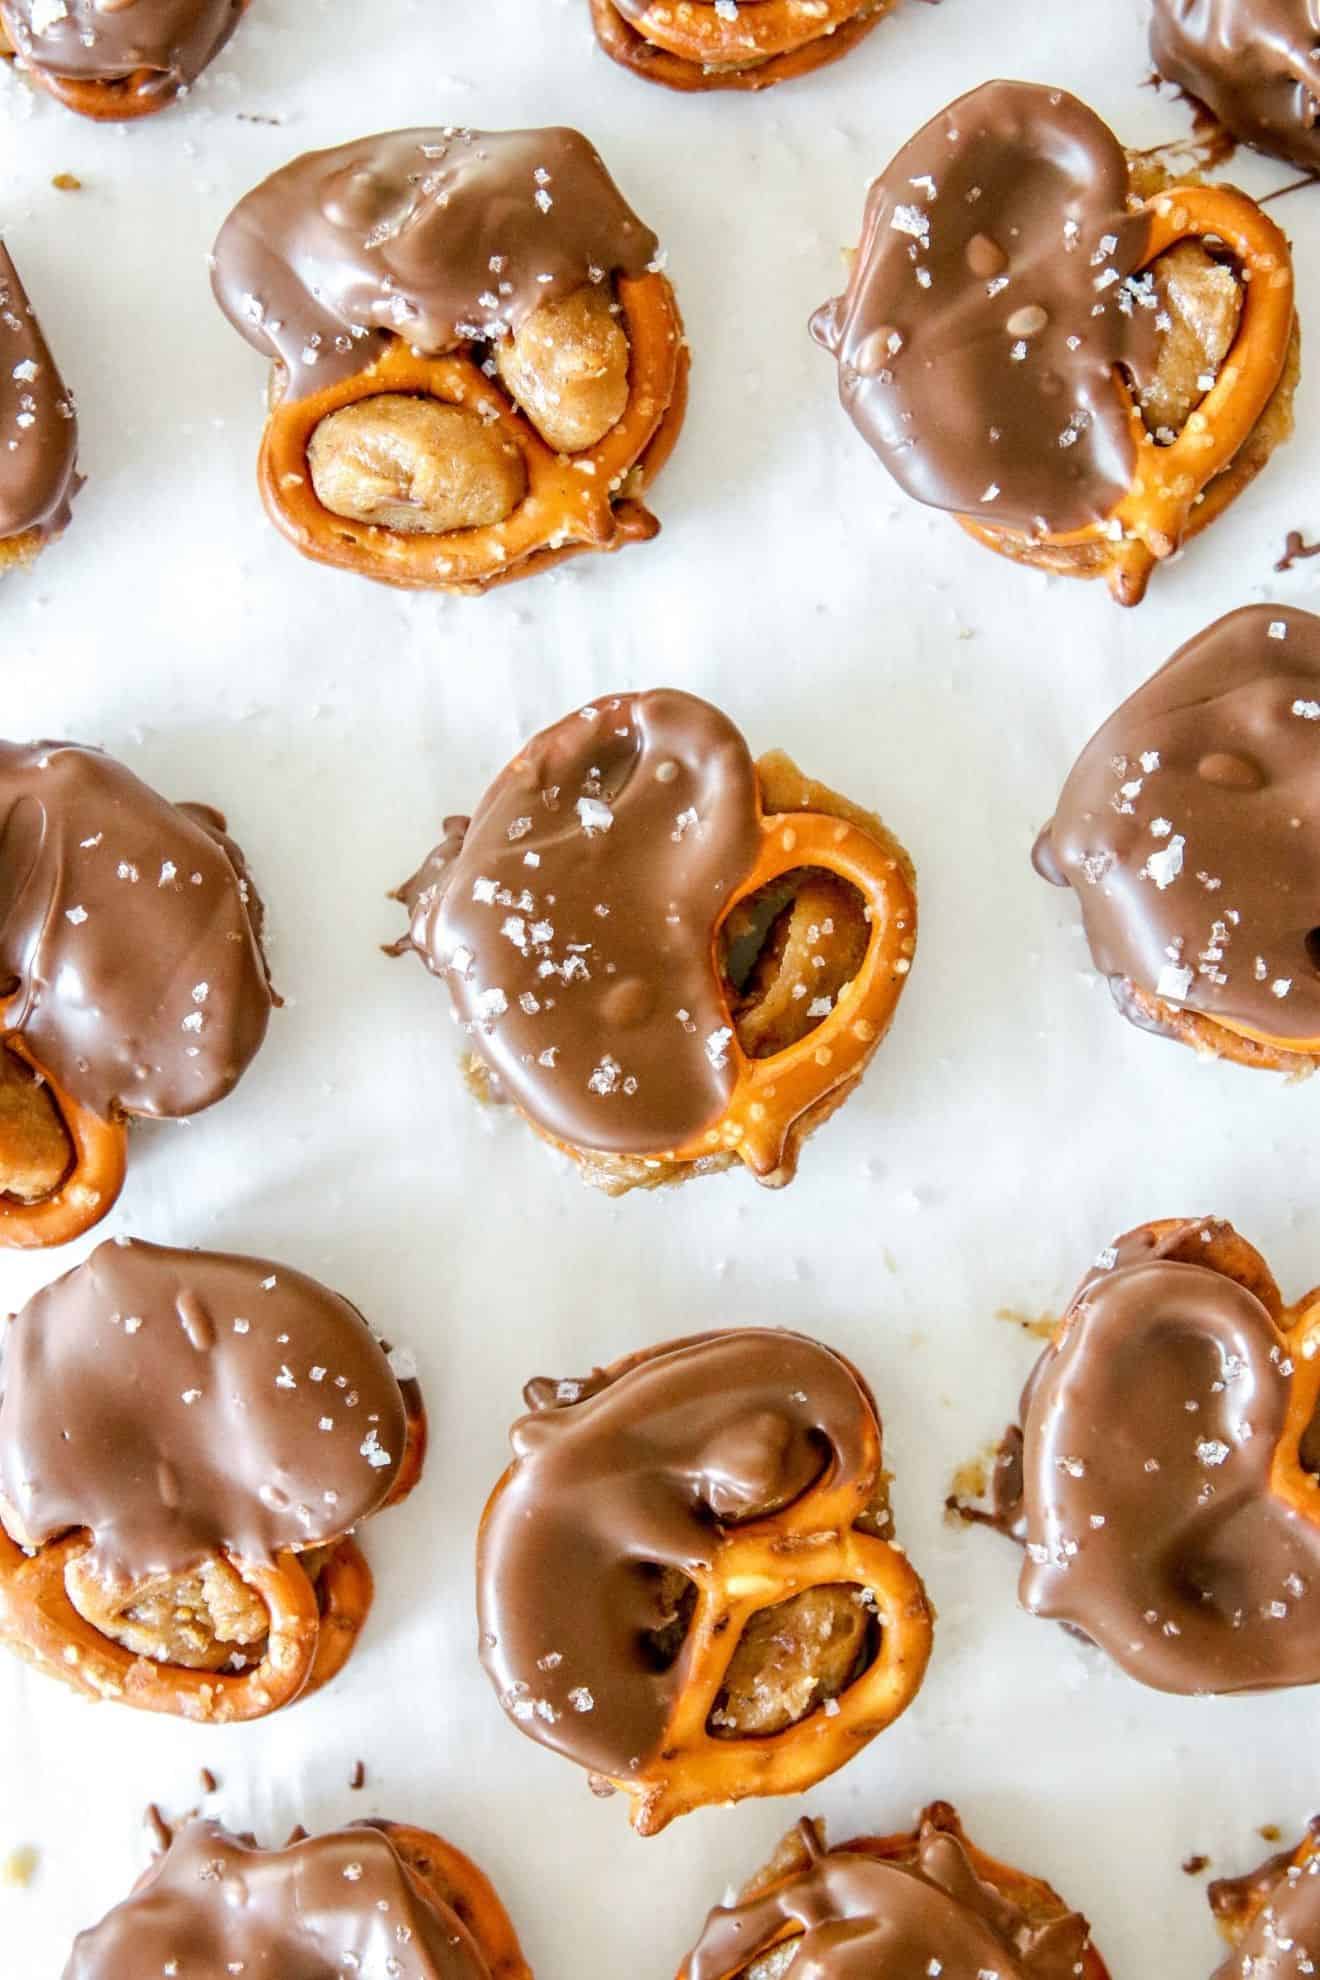 This is an overhead image of pretzels filled with peanut butter and dipped in chocolate. There is flakey salt sprinkled on top of the pretzels. The pretzels sit on a white piece of parchment paper.